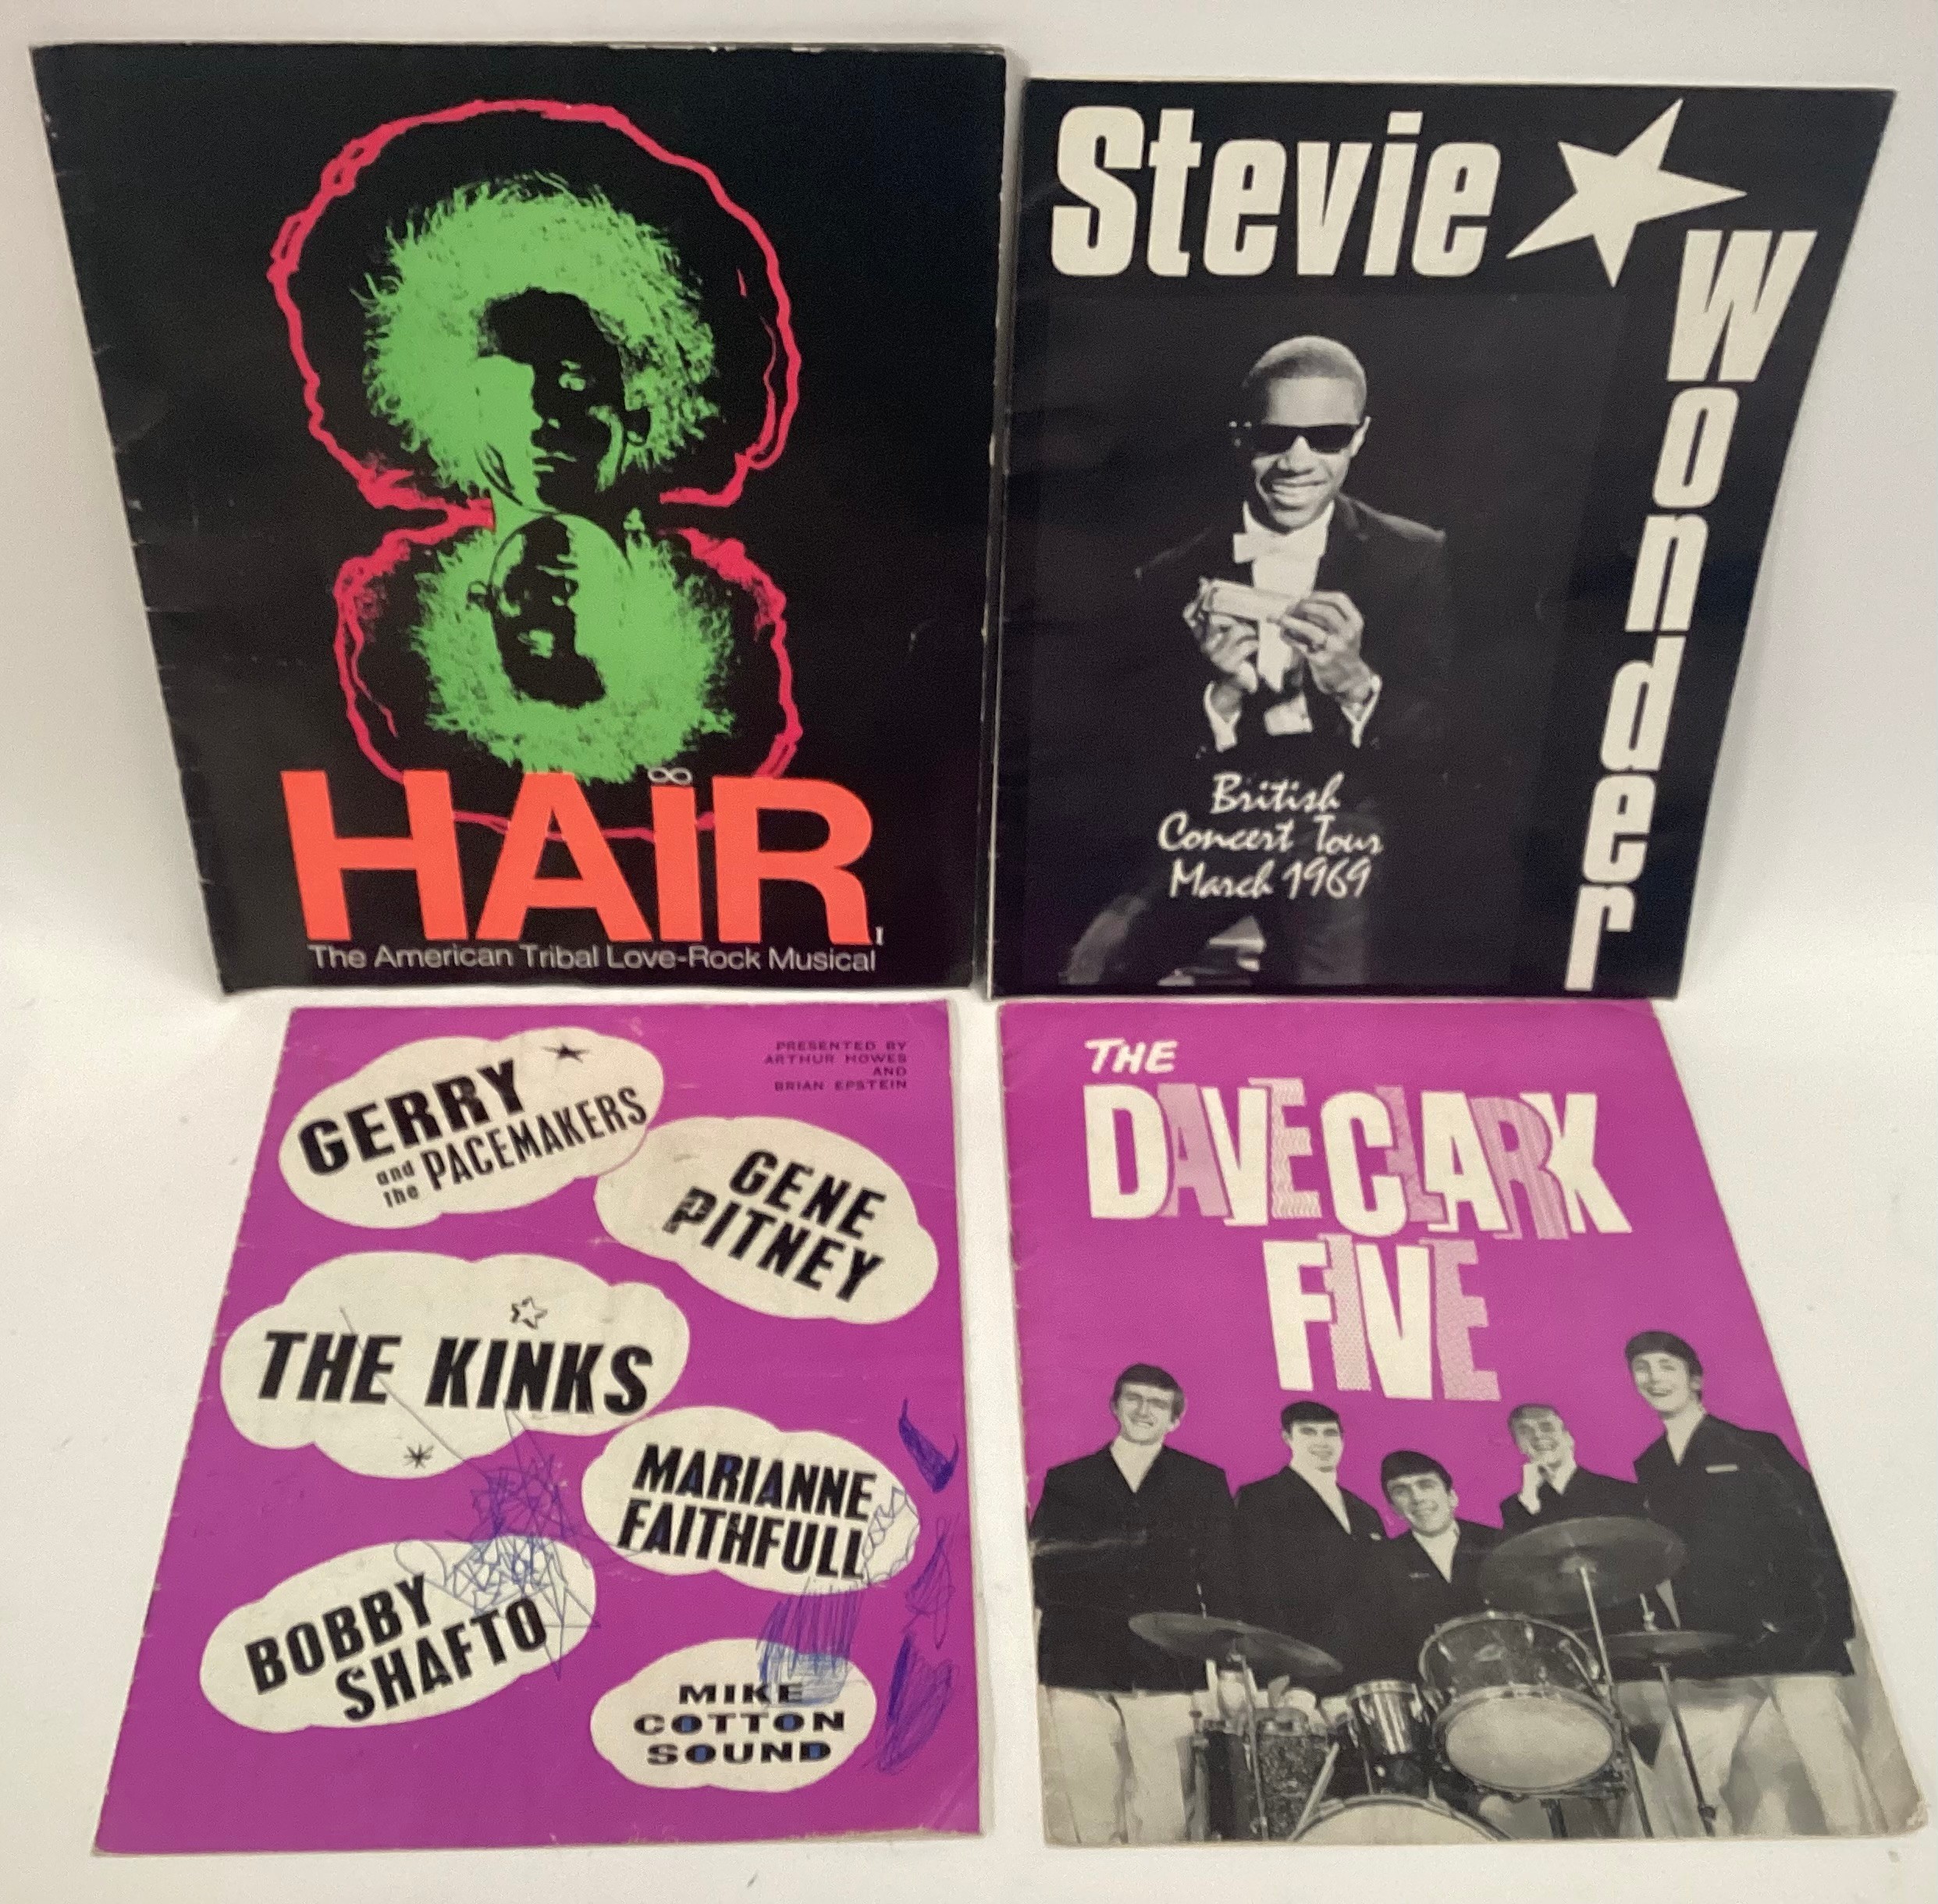 4 VINTAGE MUSIC CONCERT PROGRAMMES. To include The Dave Clark Five with stars also to include The